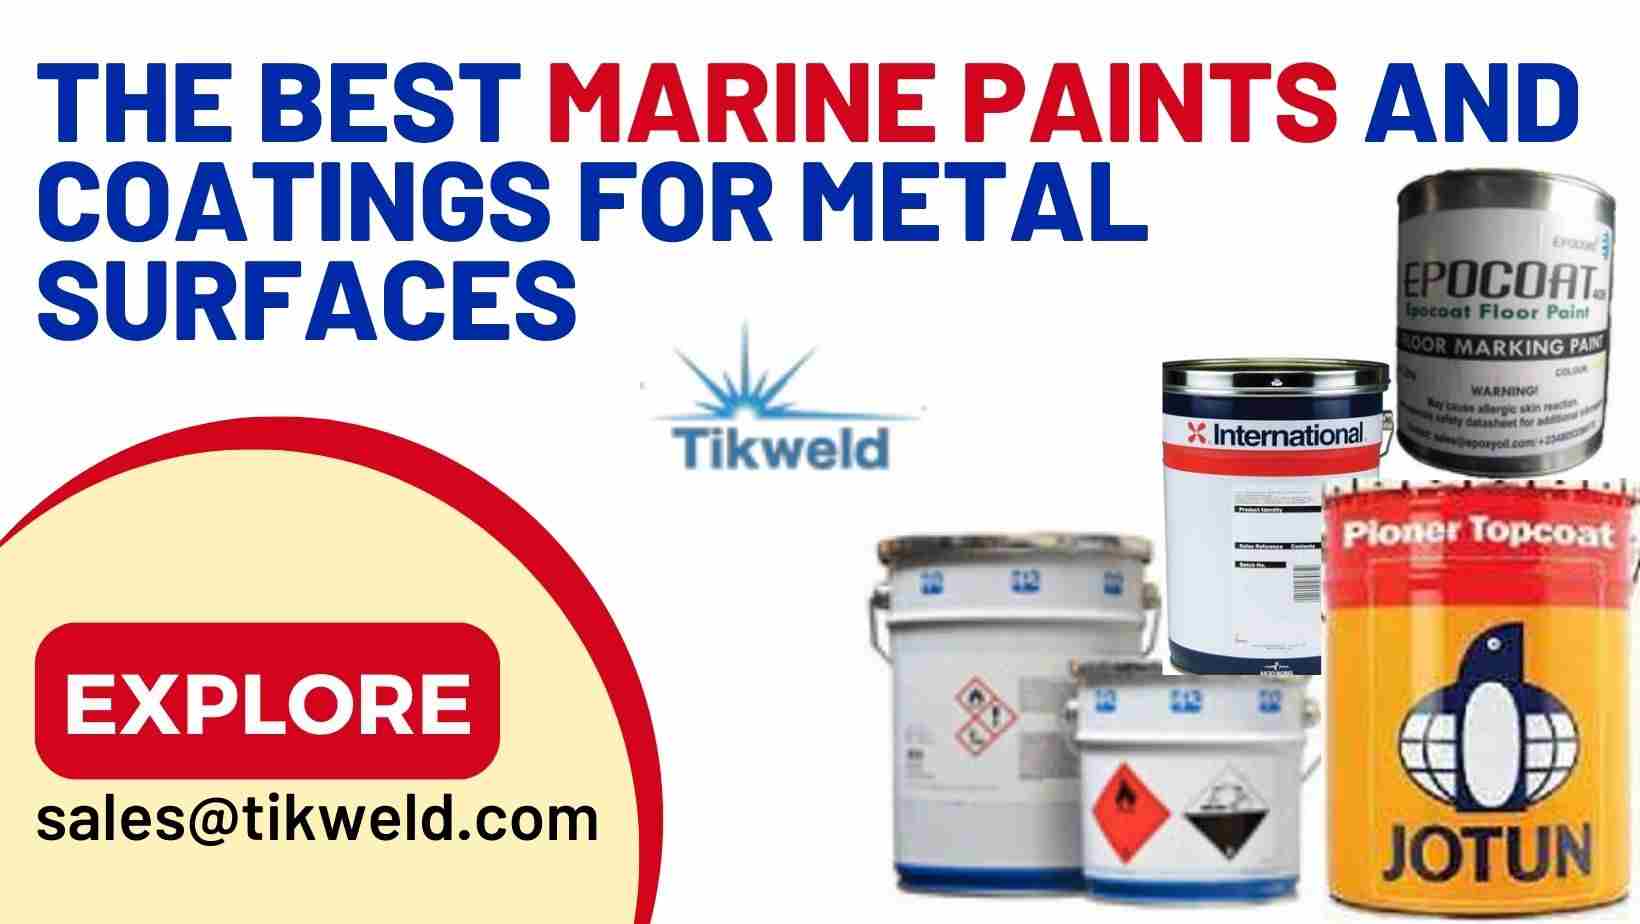 How to Paint Metal Surfaces